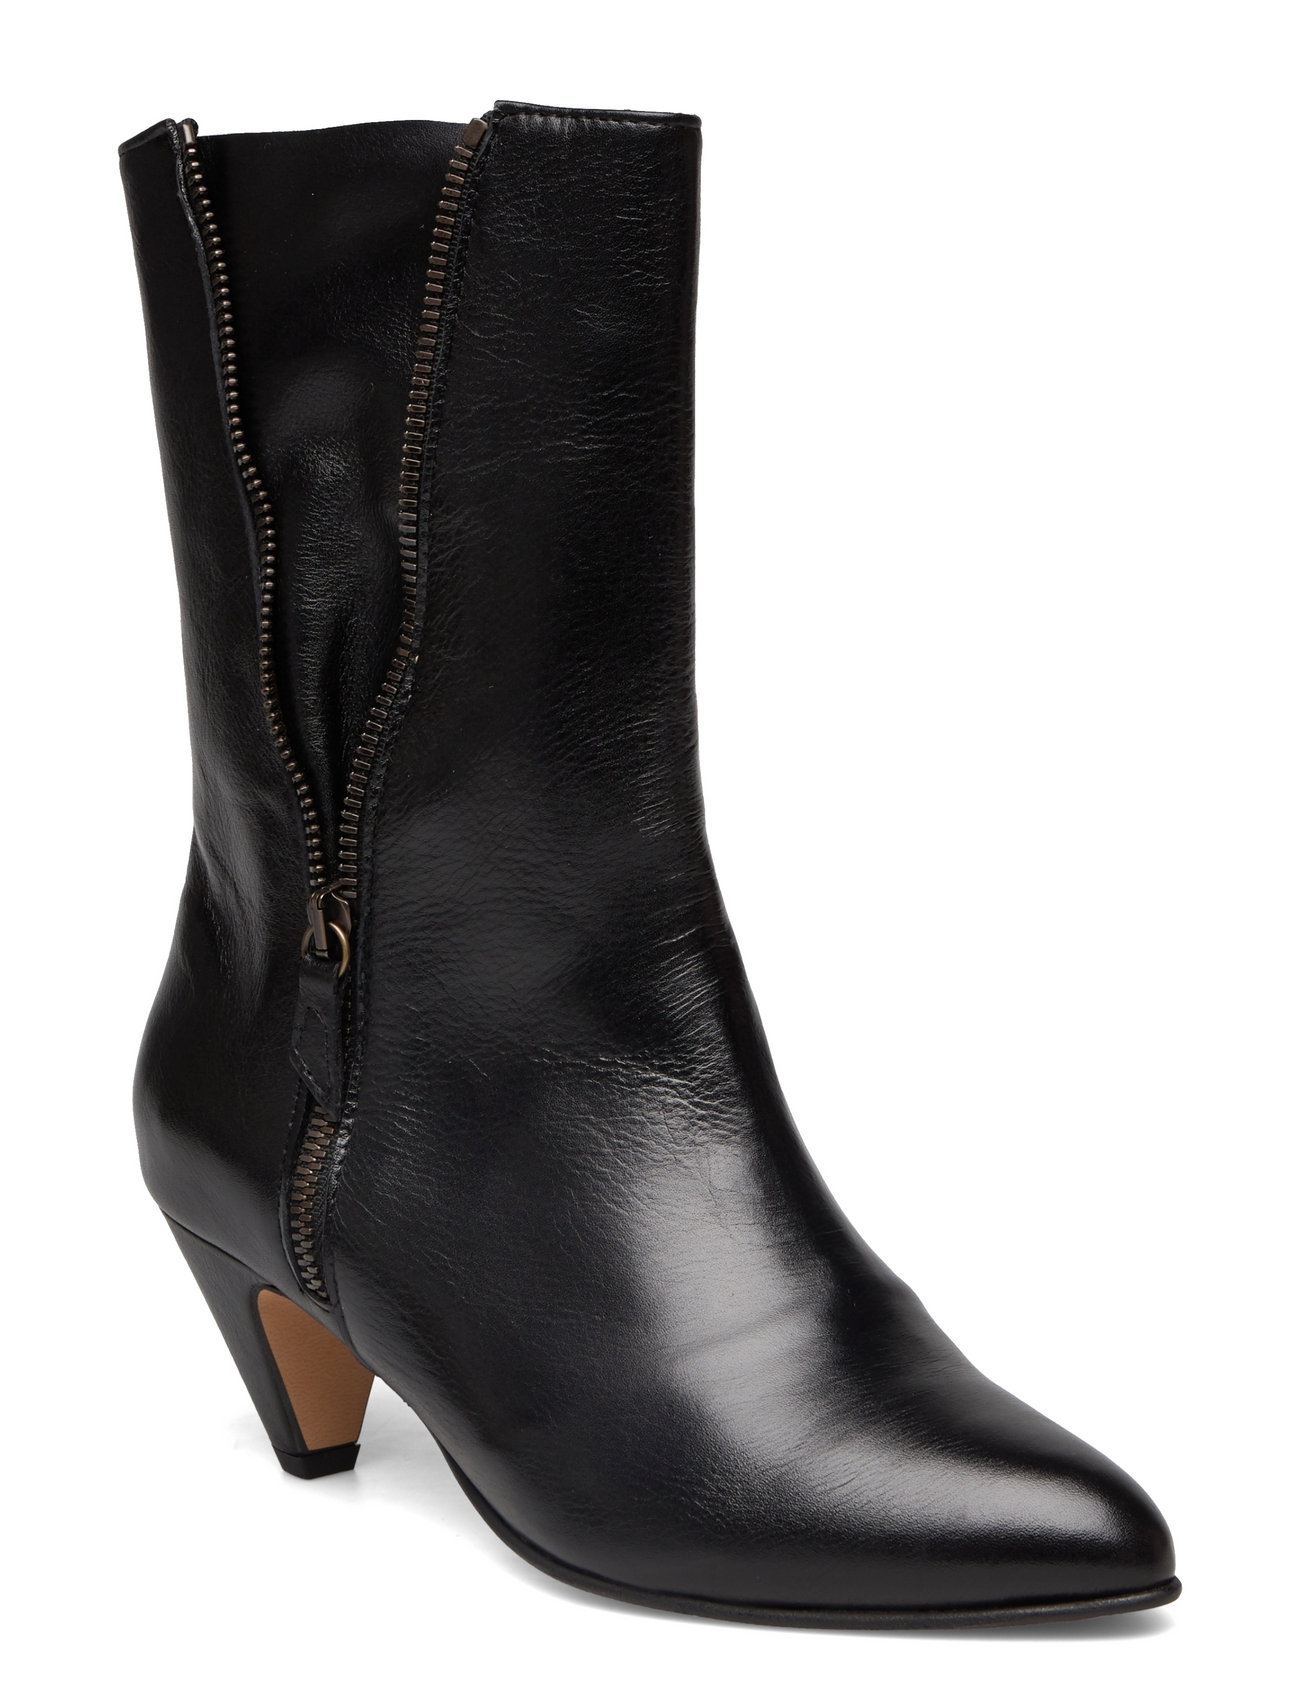 "Anonymous Copenhagen" "Livianna 50 Stiletto Shoes Boots Ankle With Heel Black Anonymous